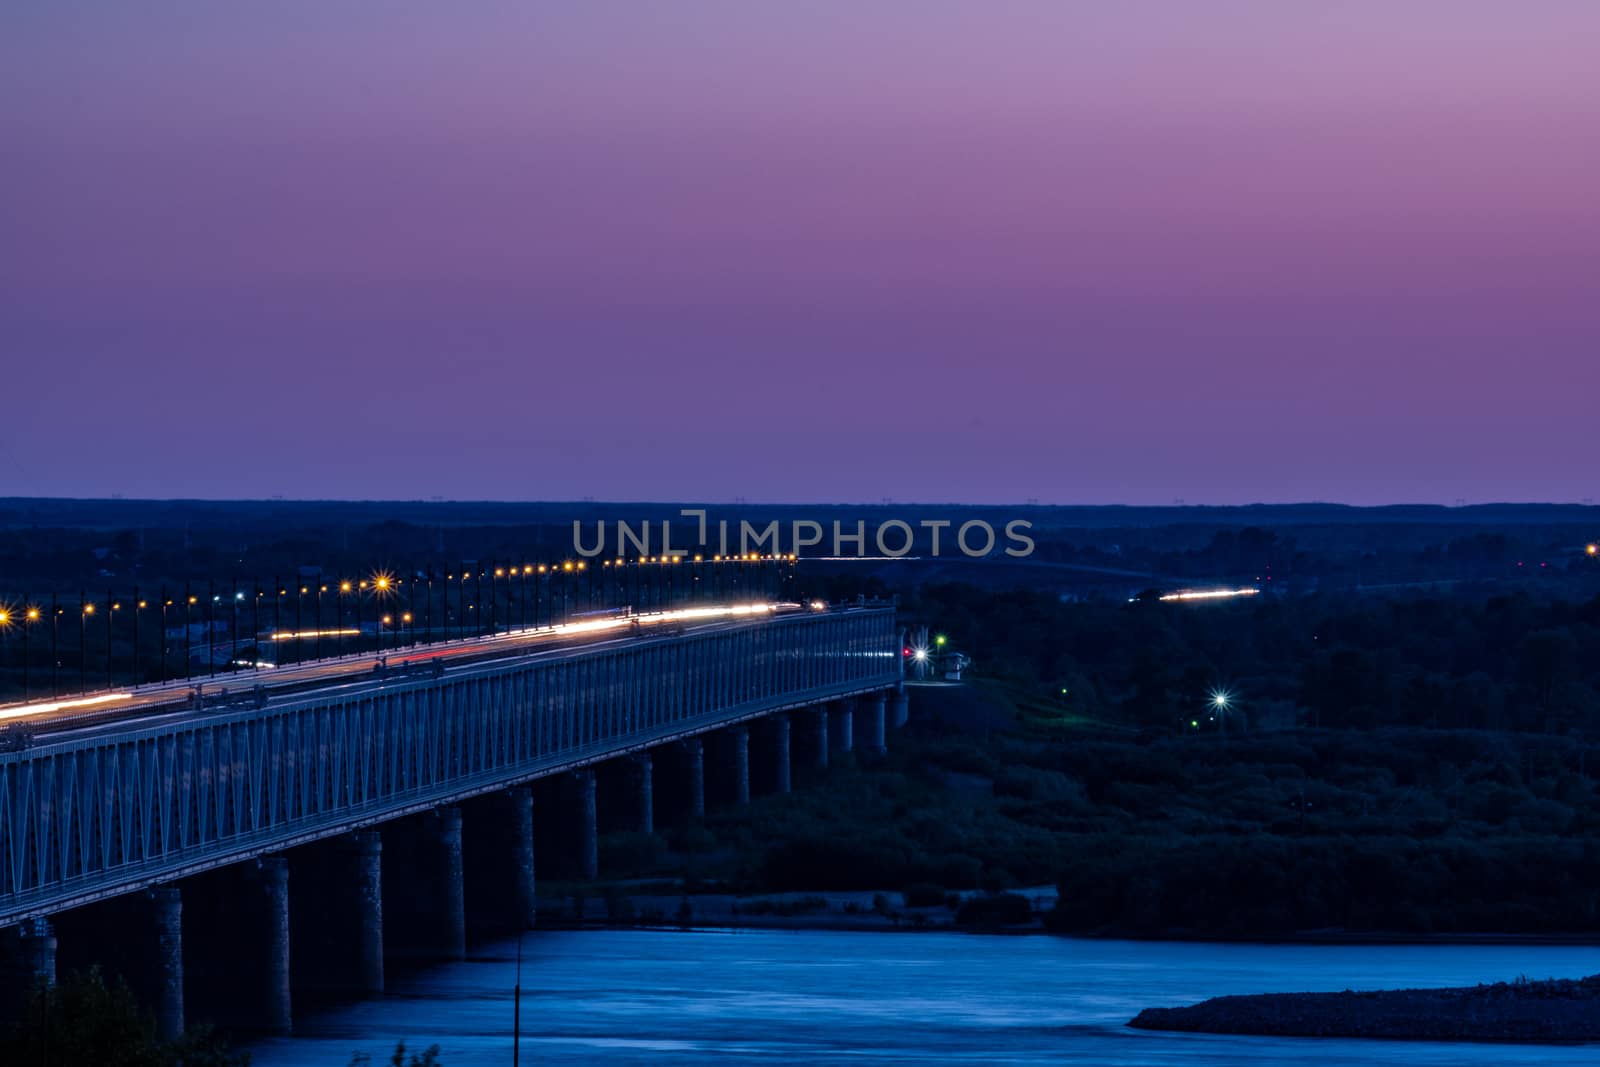 Bridge over the Amur river in Khabarovsk, Russia. Night photography. by rdv27